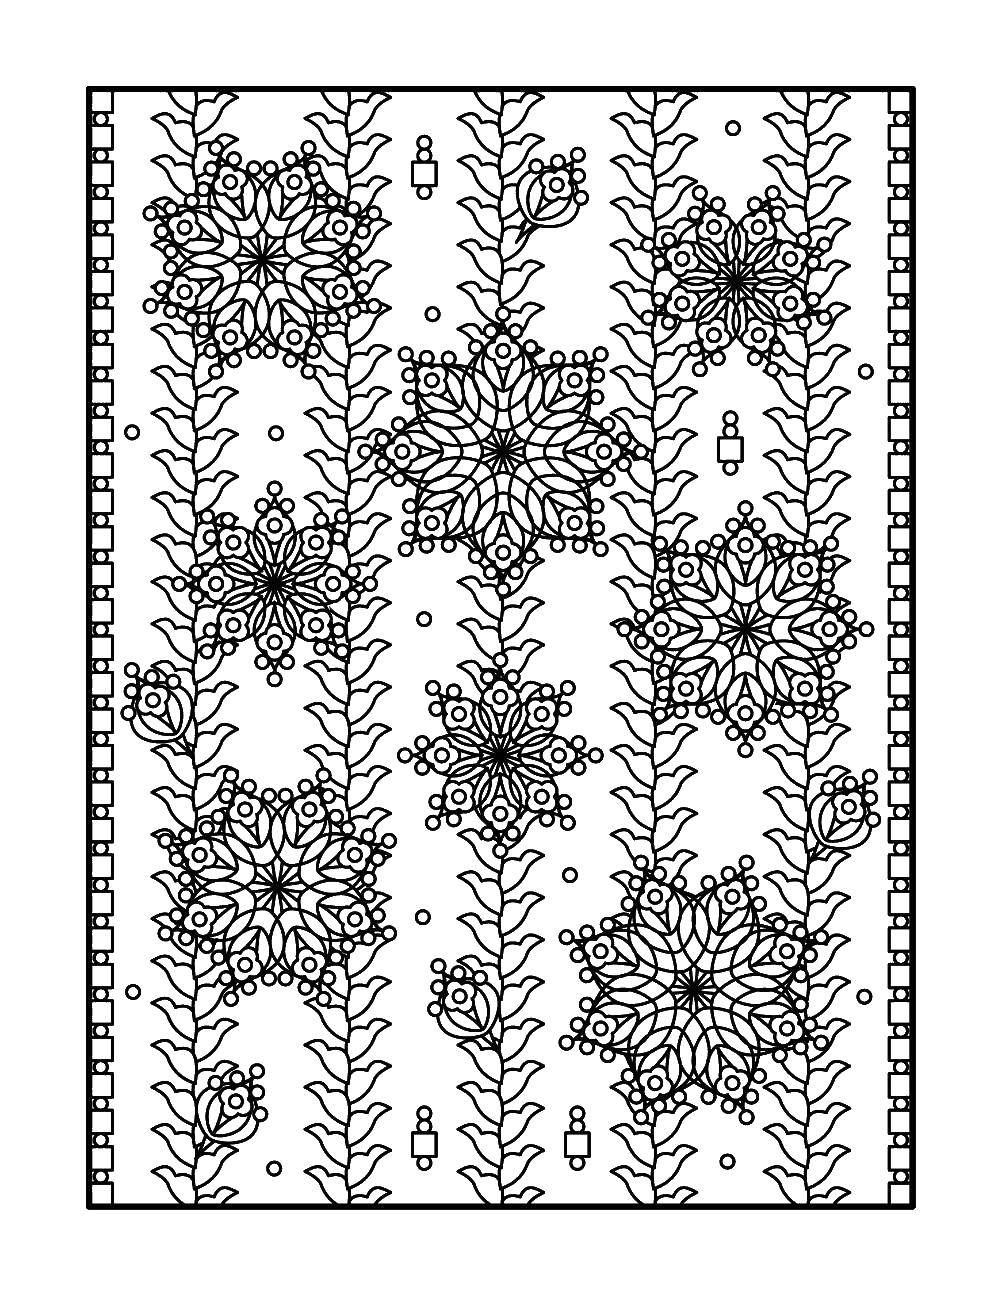 Coloring A series of patterns. Category coloring pages for teenagers. Tags:  Patterns, flower.